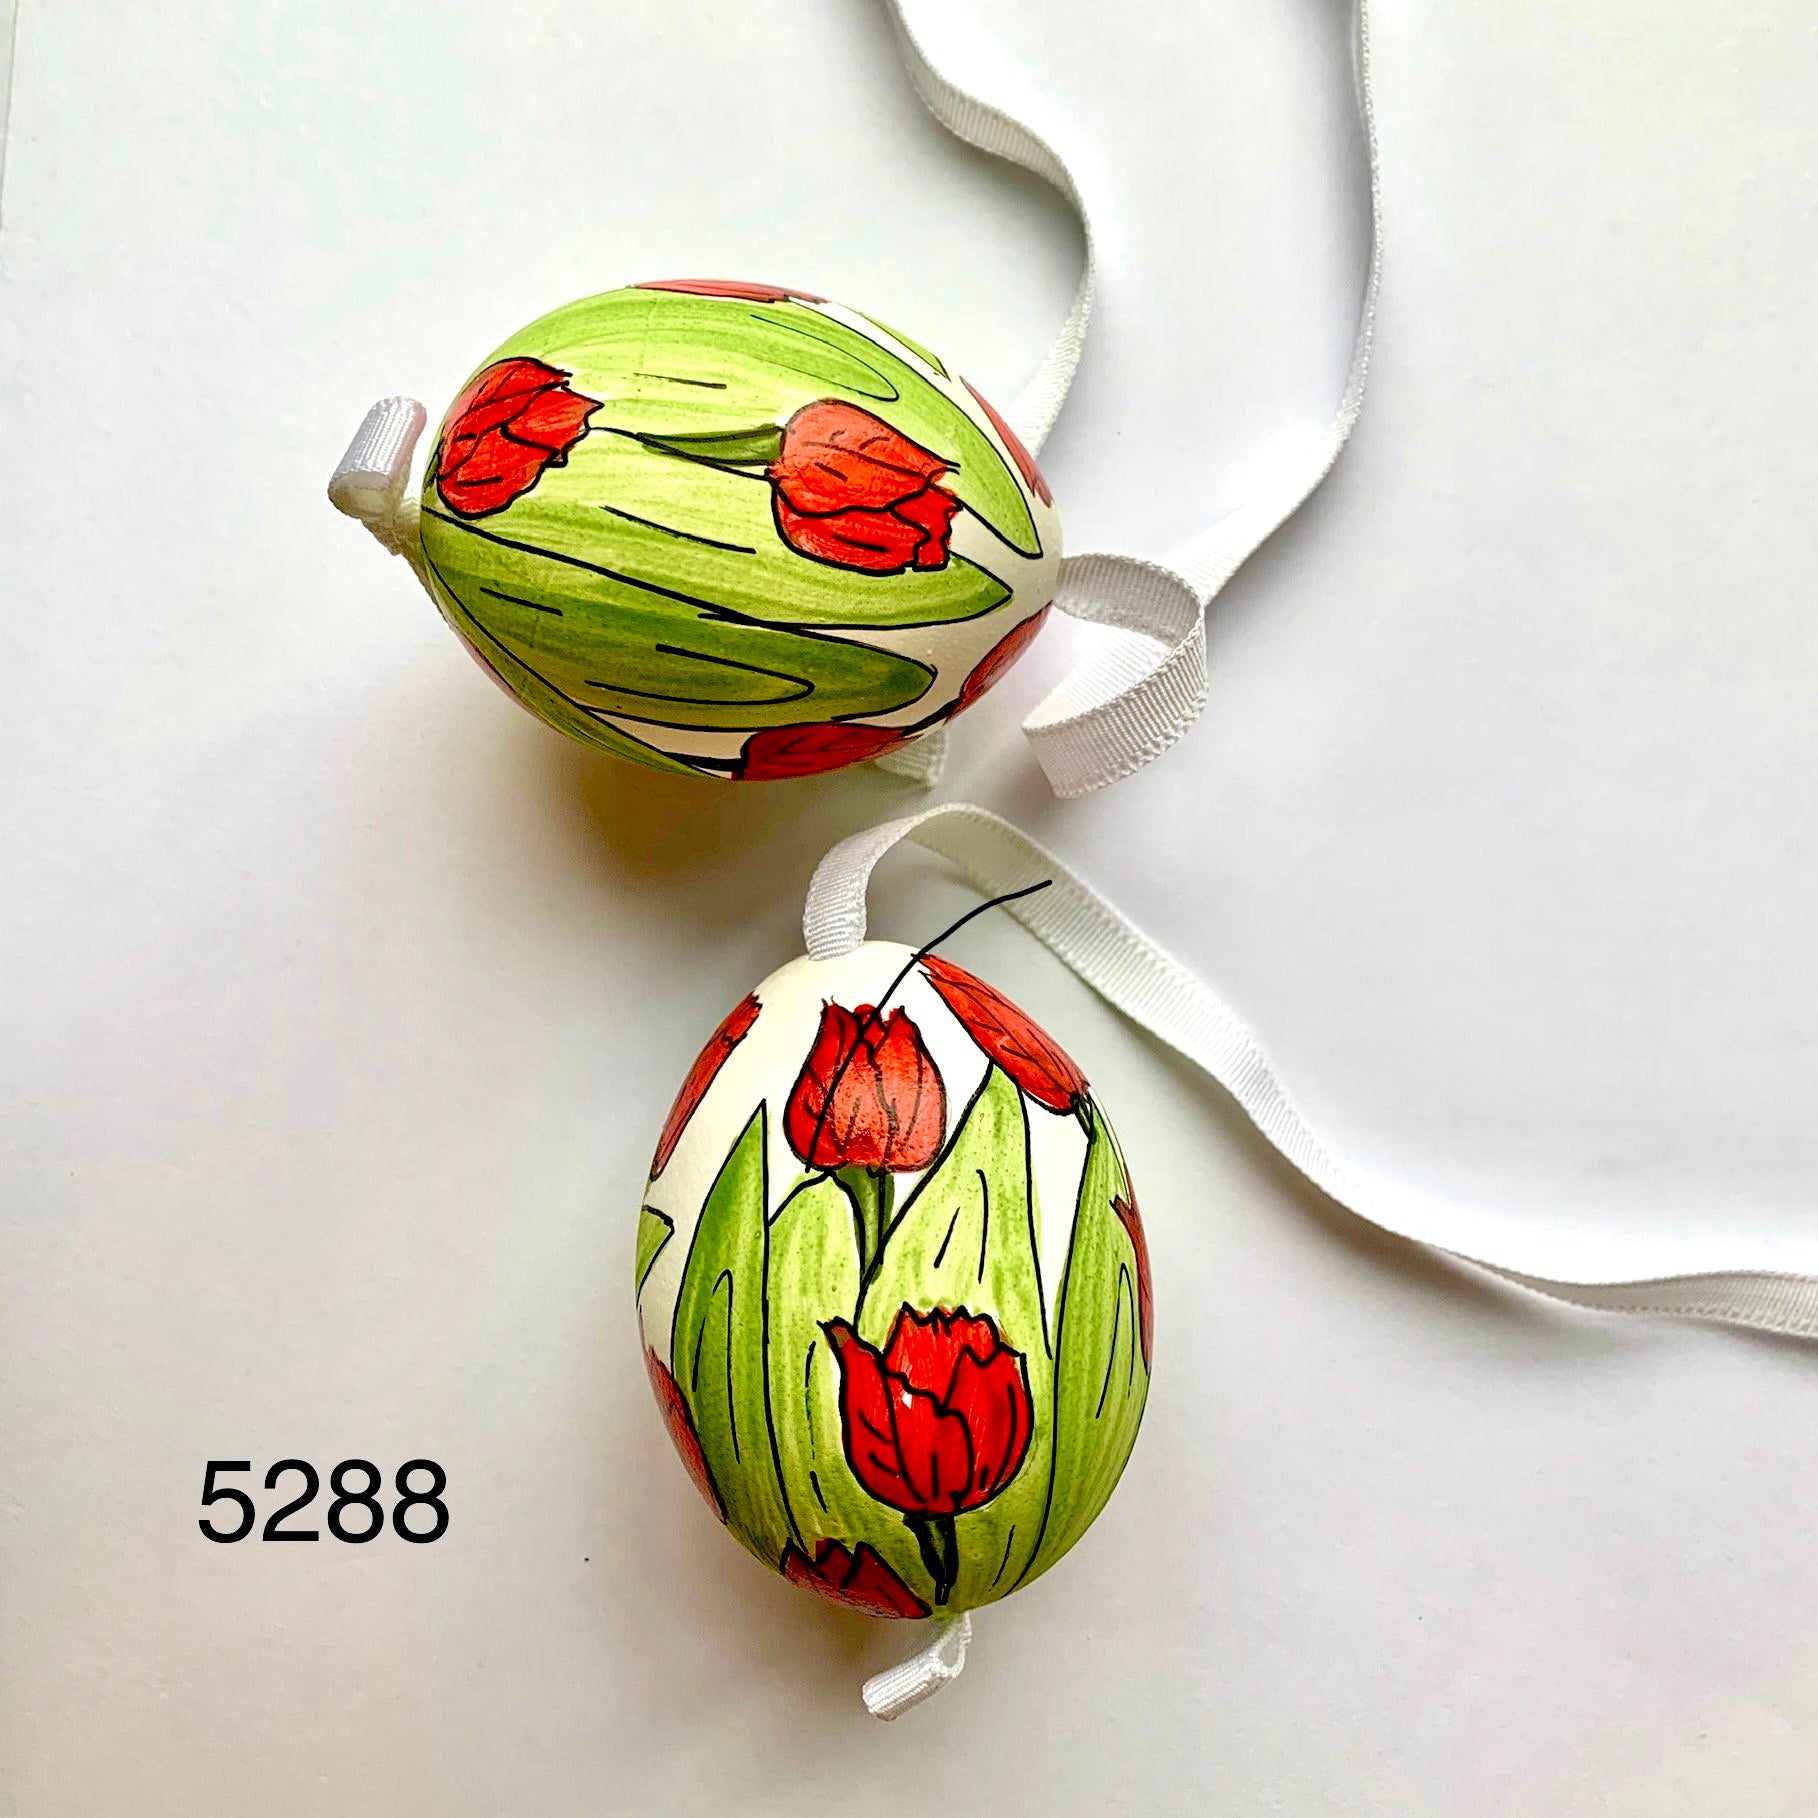 Peter's Hand Painted Egg from Austria 5288